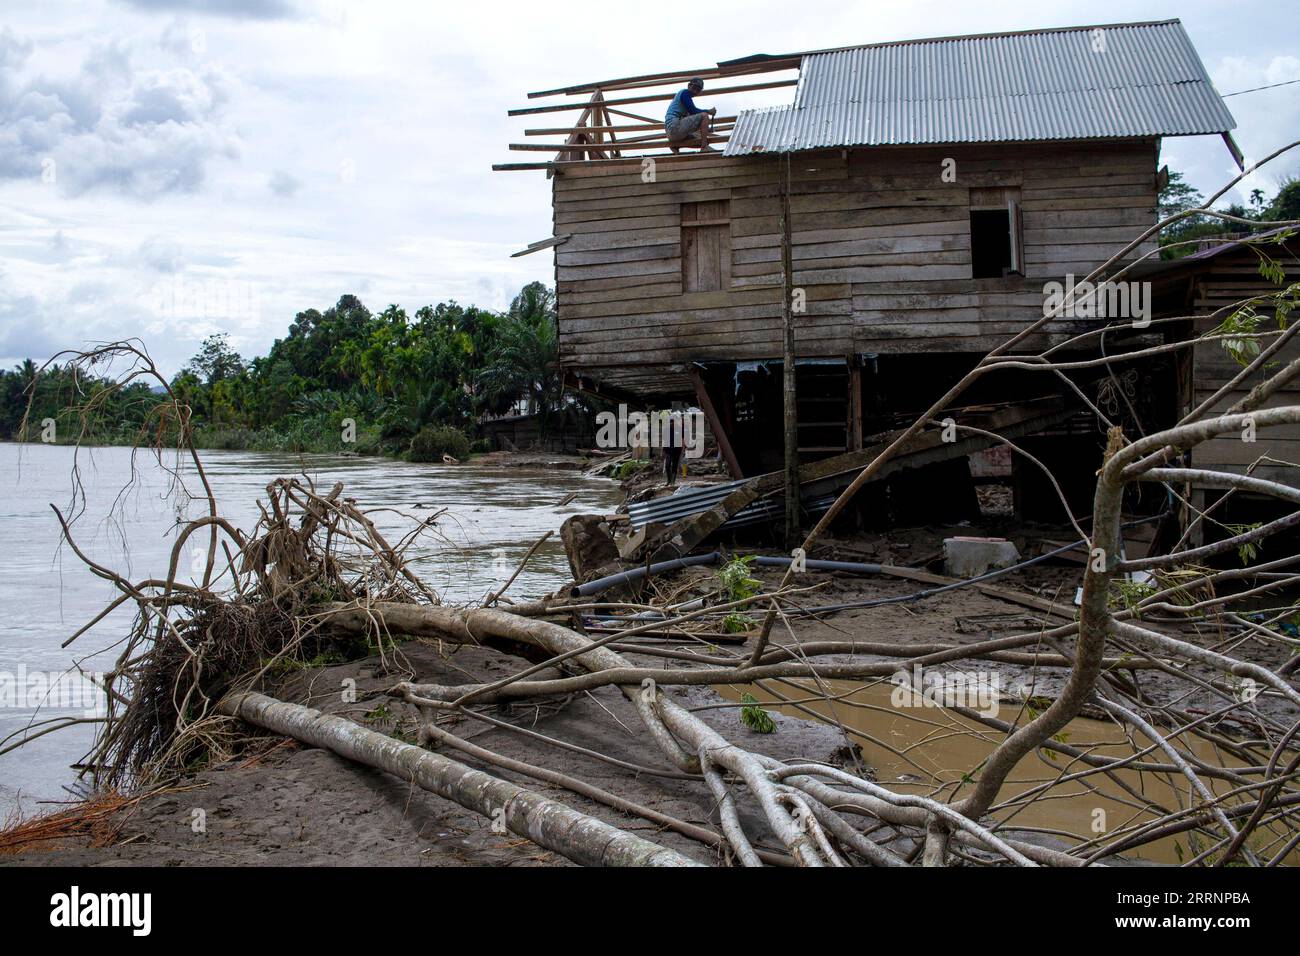 News Bilder des Tages 230124 -- ACEH URARA, Jan. 24, 2023 -- A man tries to fix the roof of his house damaged by flood water due to heavy rain in Lubok Pusaka village, Aceh Utara district, Aceh Province, Indonesia, Jan. 23, 2023. Photo by /Xinhua INDONESIA-ACEH UTARA-FLOOD FachrulxReza PUBLICATIONxNOTxINxCHN Stock Photo